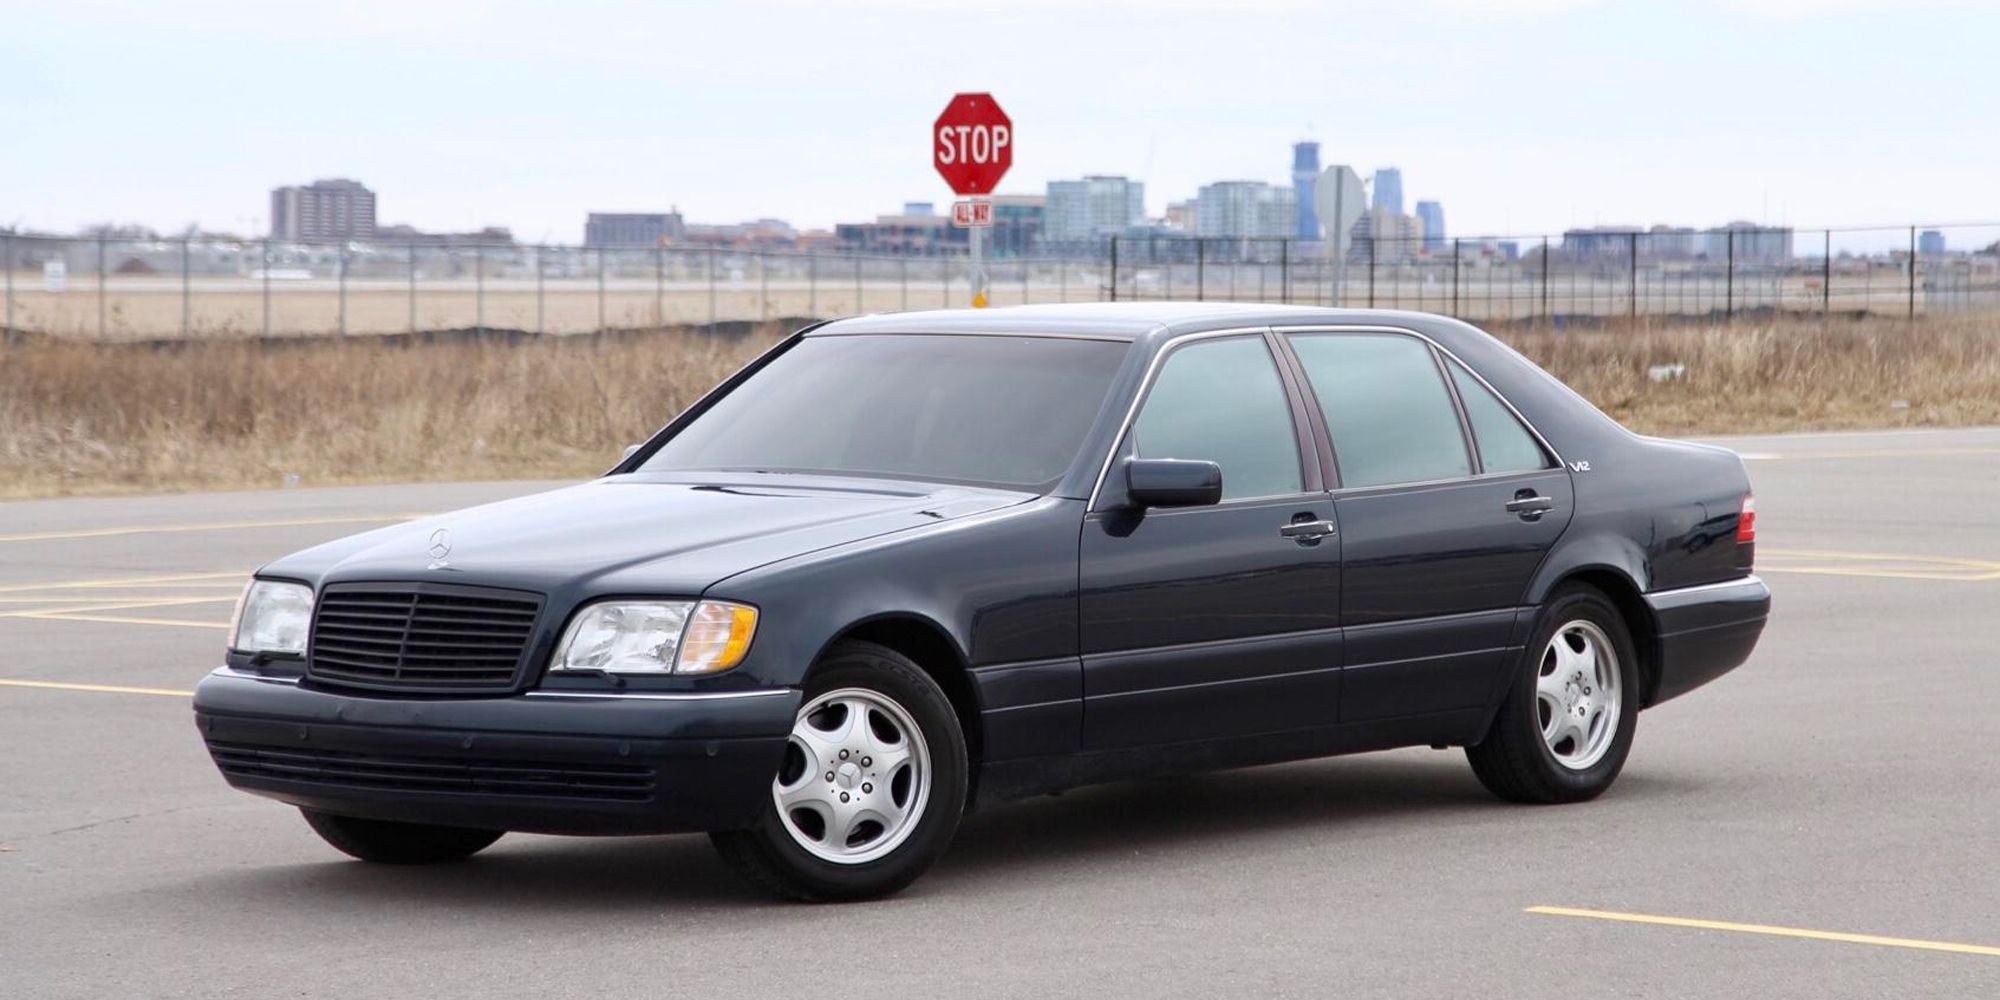 The front of the W140 S600